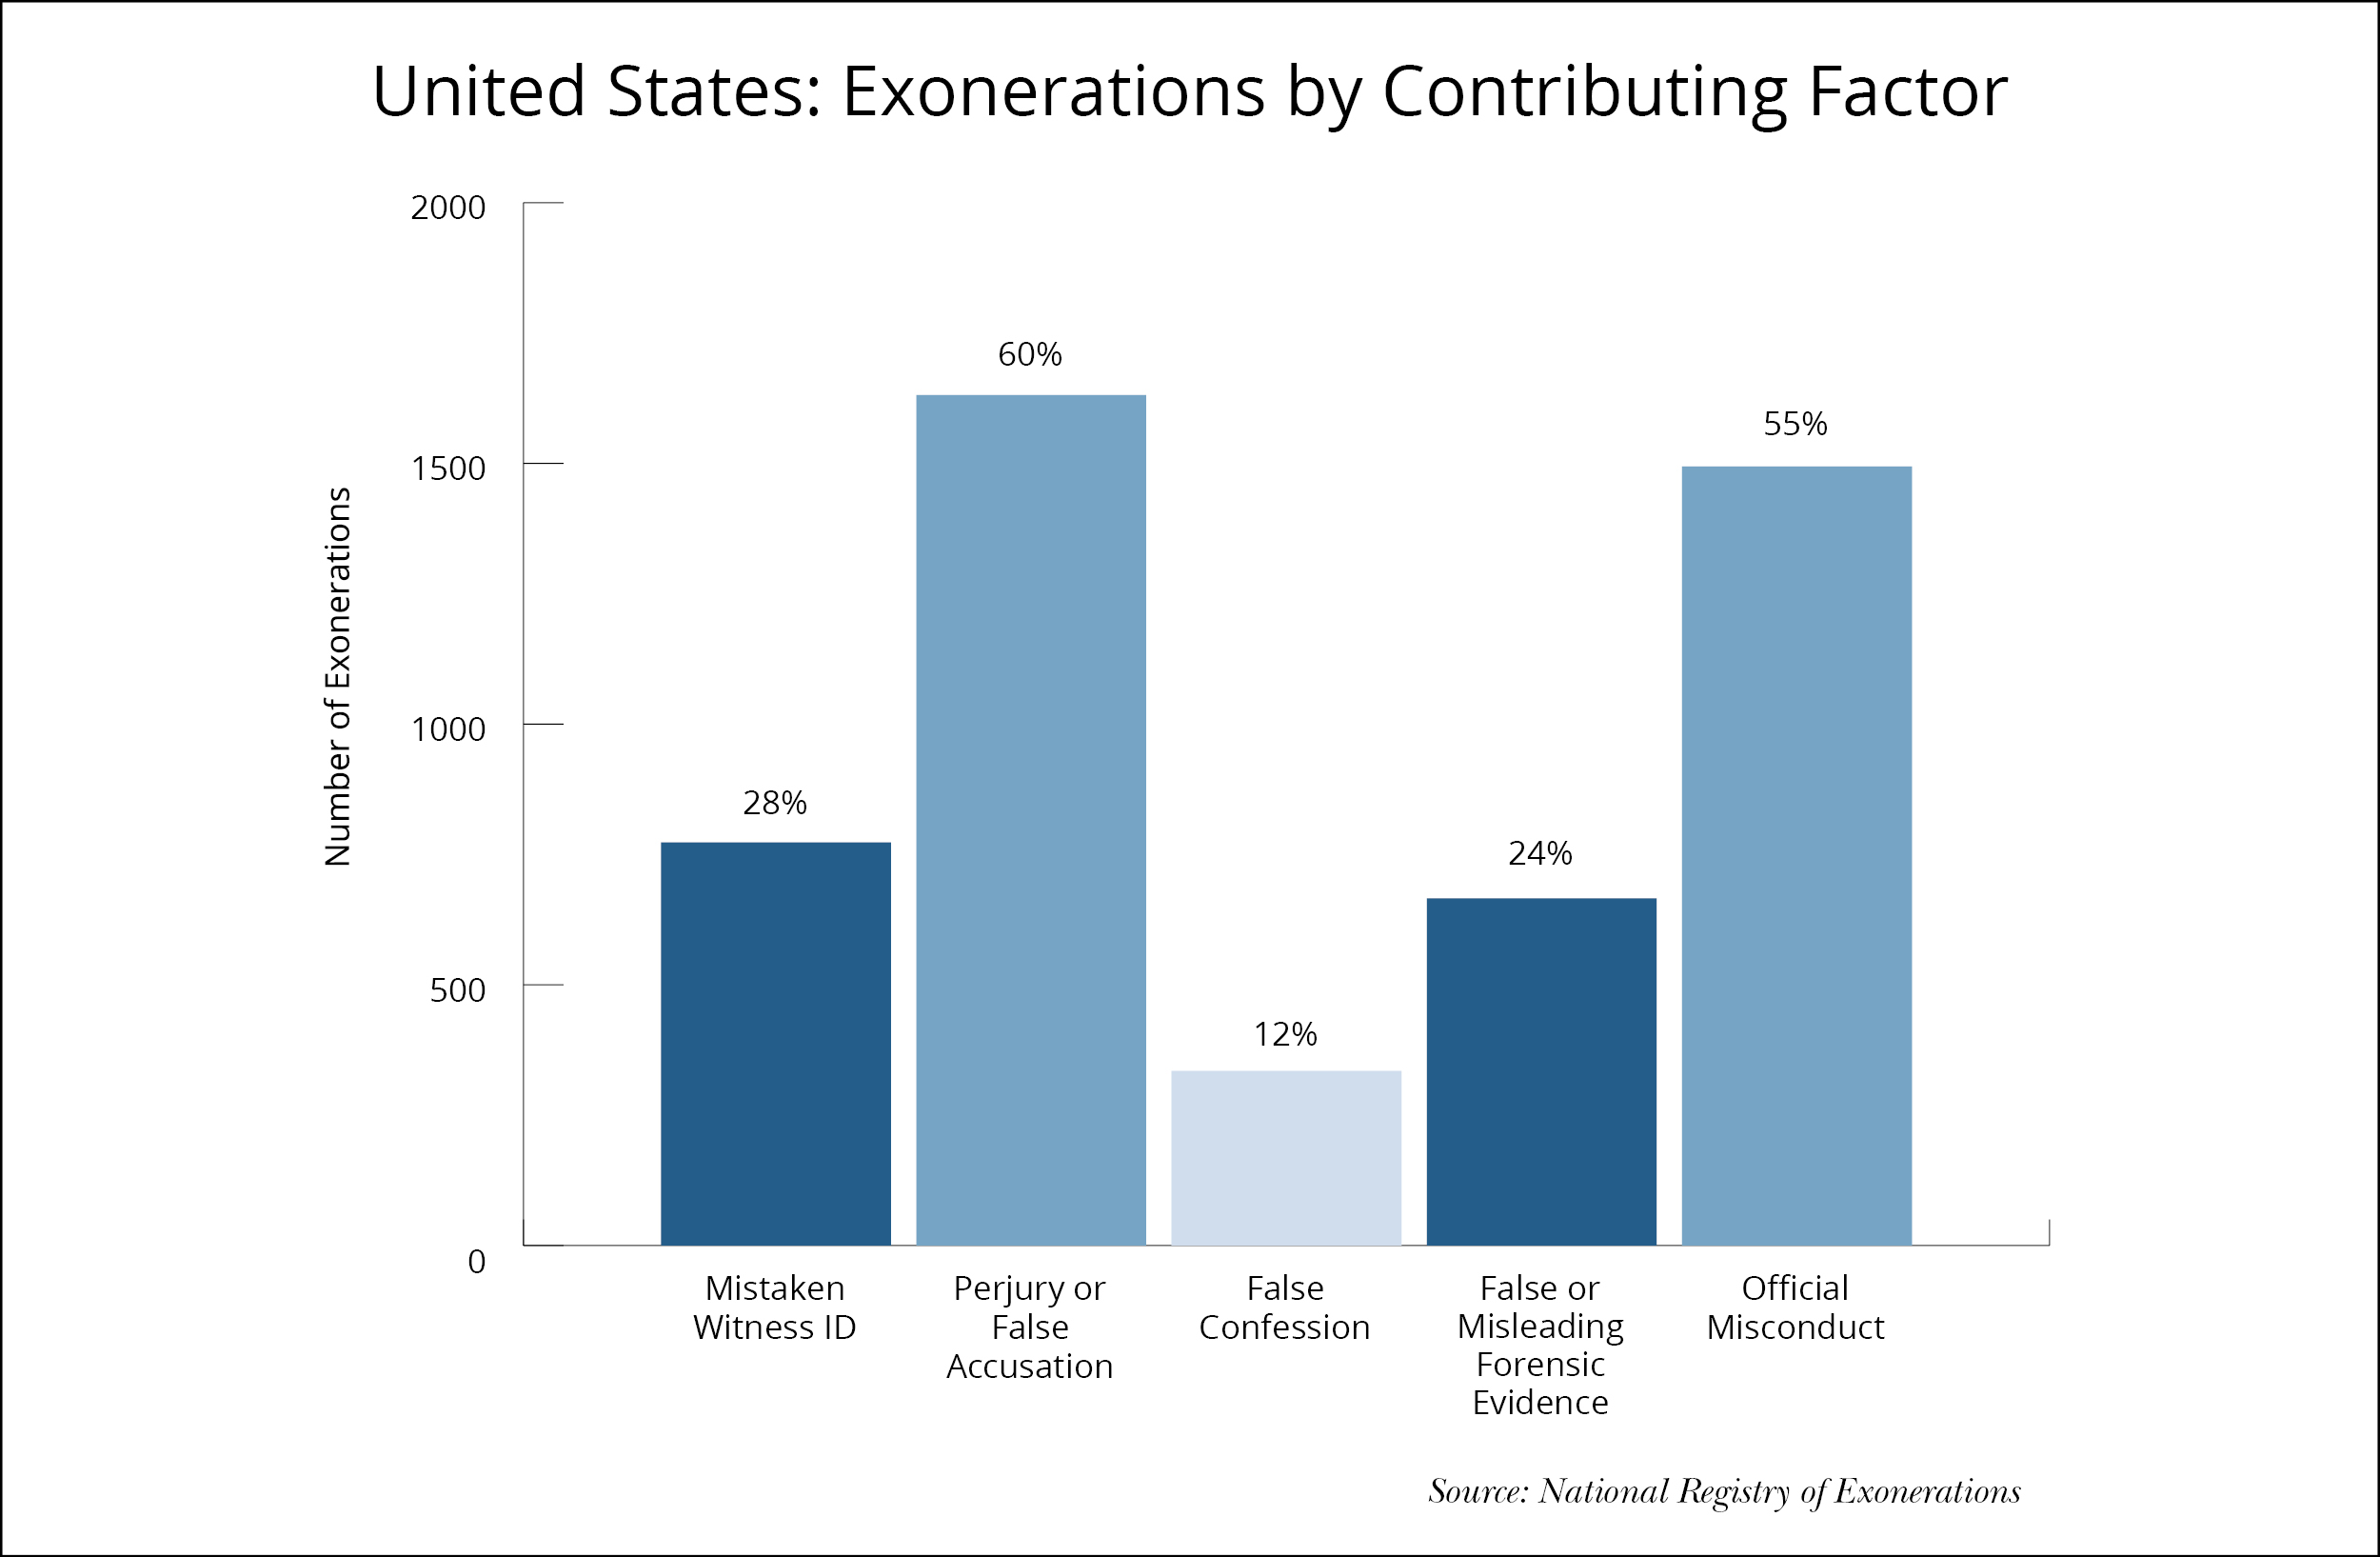 Image of a bar graph showing United States exonerations by contributing factors: mistaken witness ID (28%), perjury or false accusation (60%), false confession (12%), false or misleading forensic evidence (24%), and official misconduct (55%)